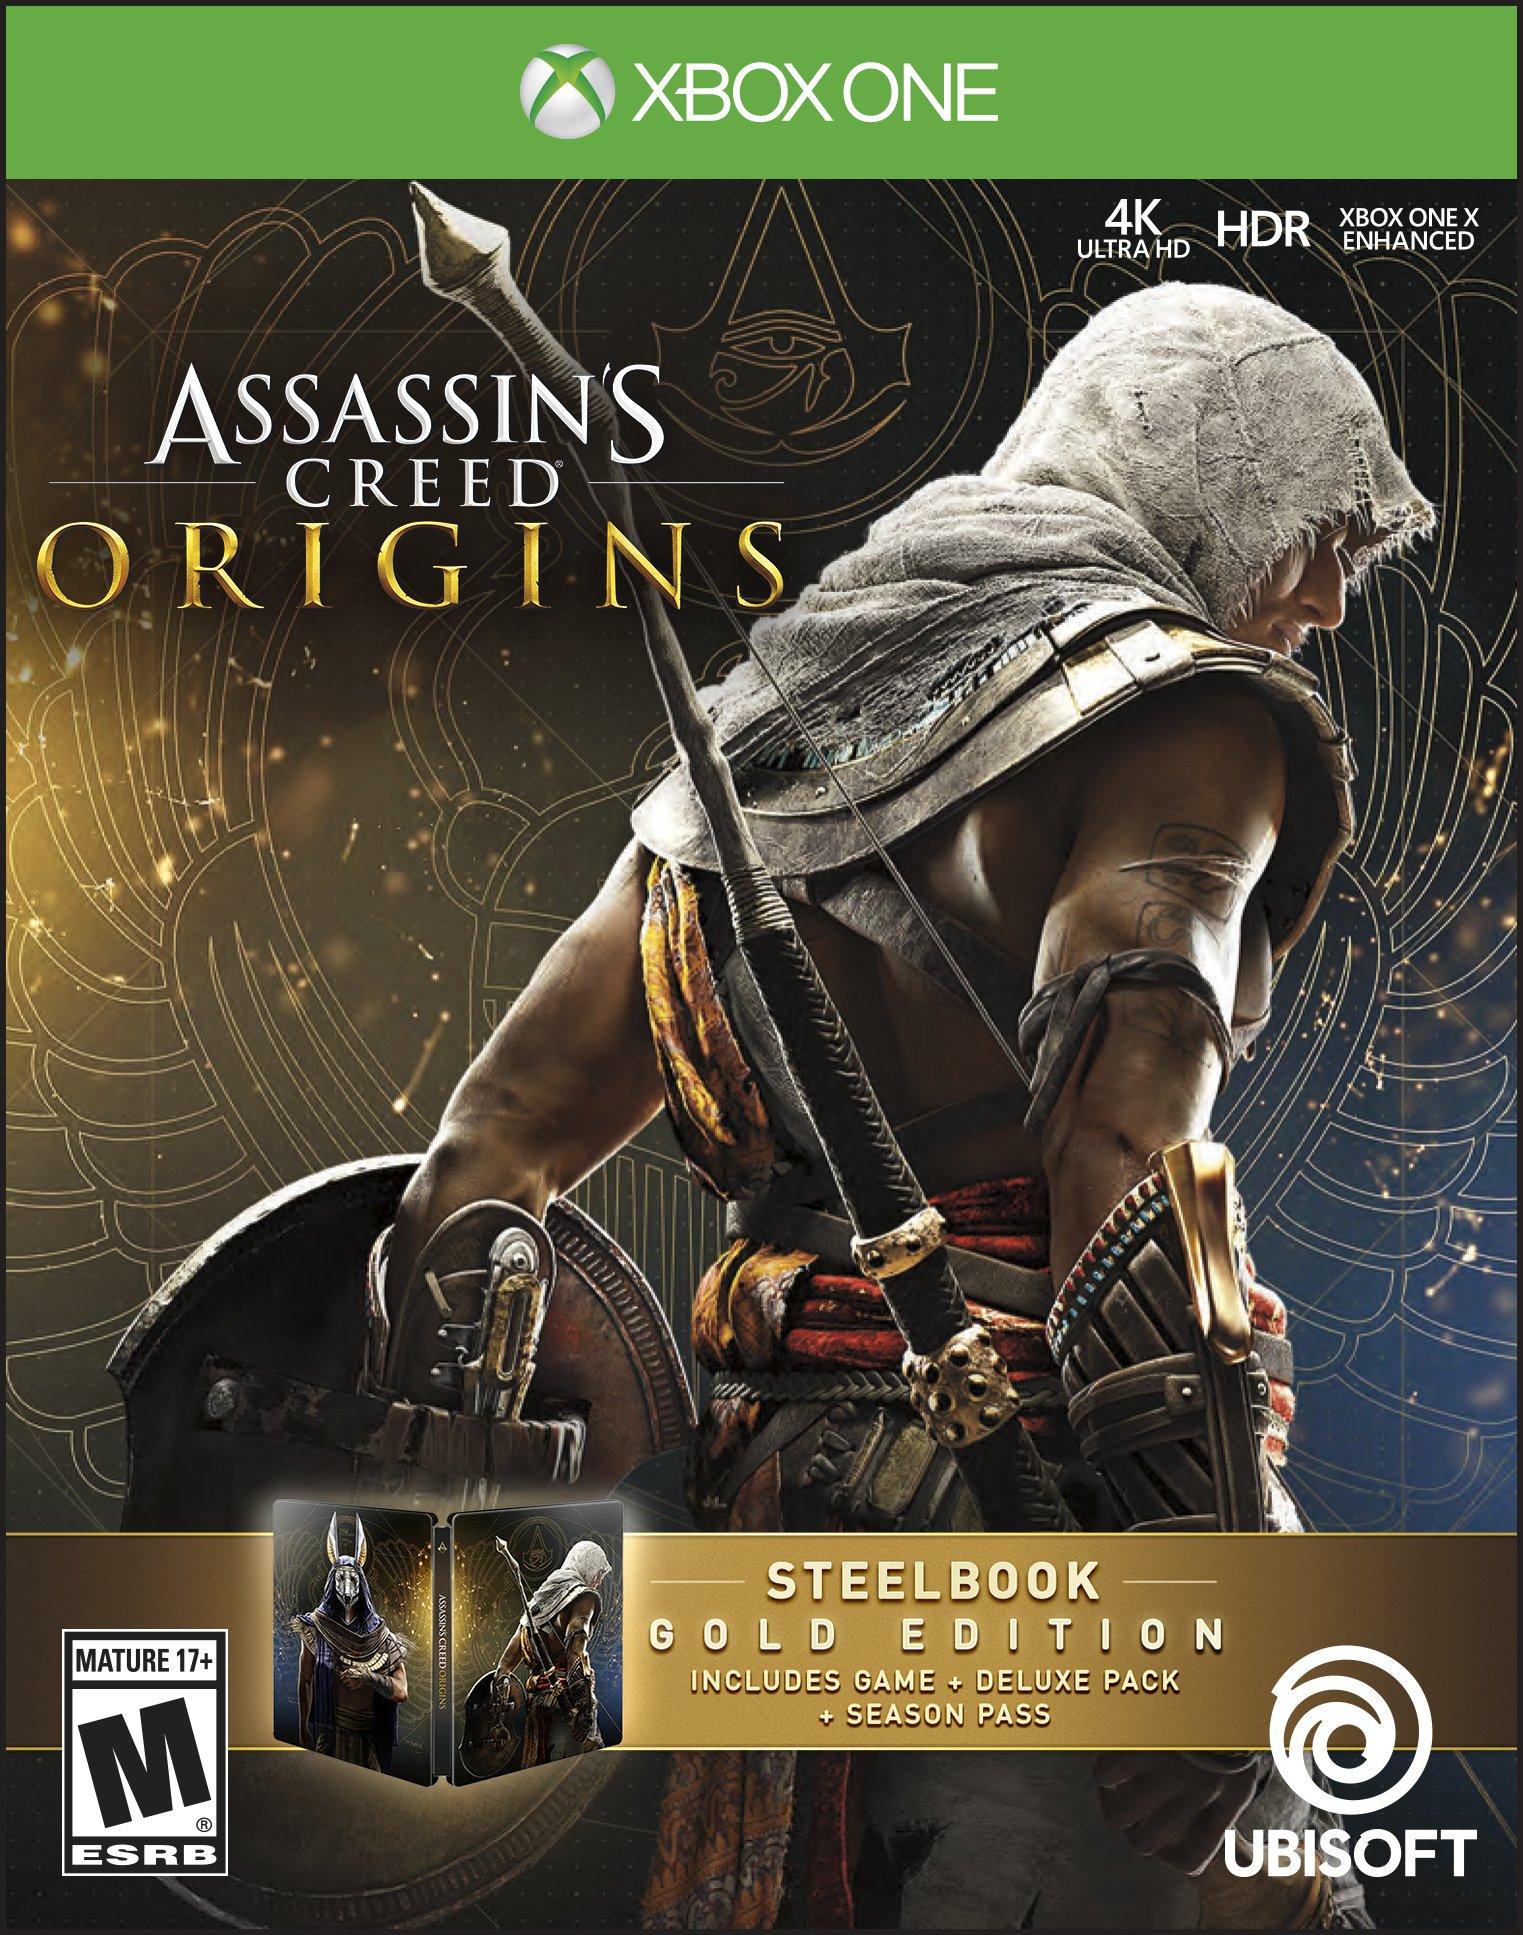 Buy Assassin's Creed® Origins Standard Edition for PS4, Xbox One and PC